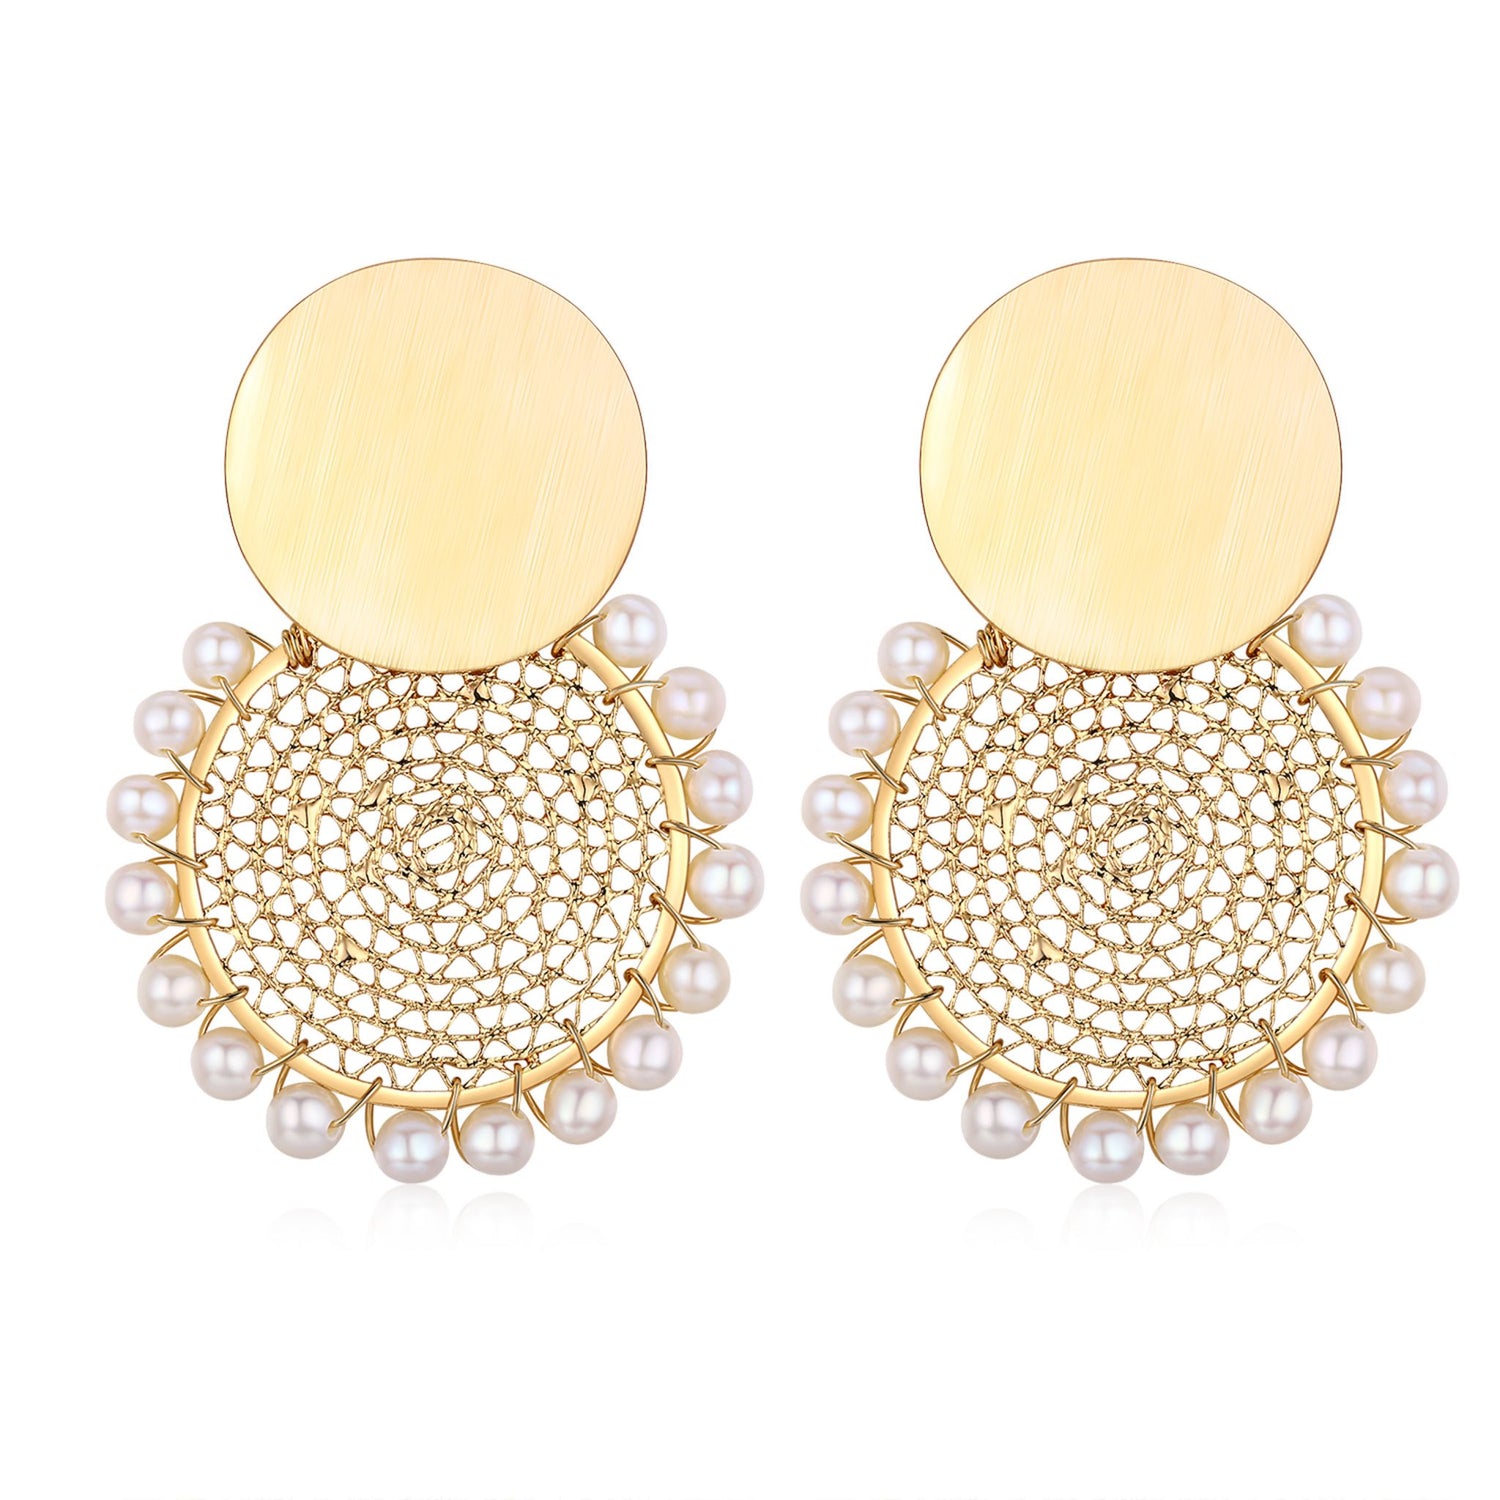 Retro Carved Gold Pearl Earrings - Timeless Pearl